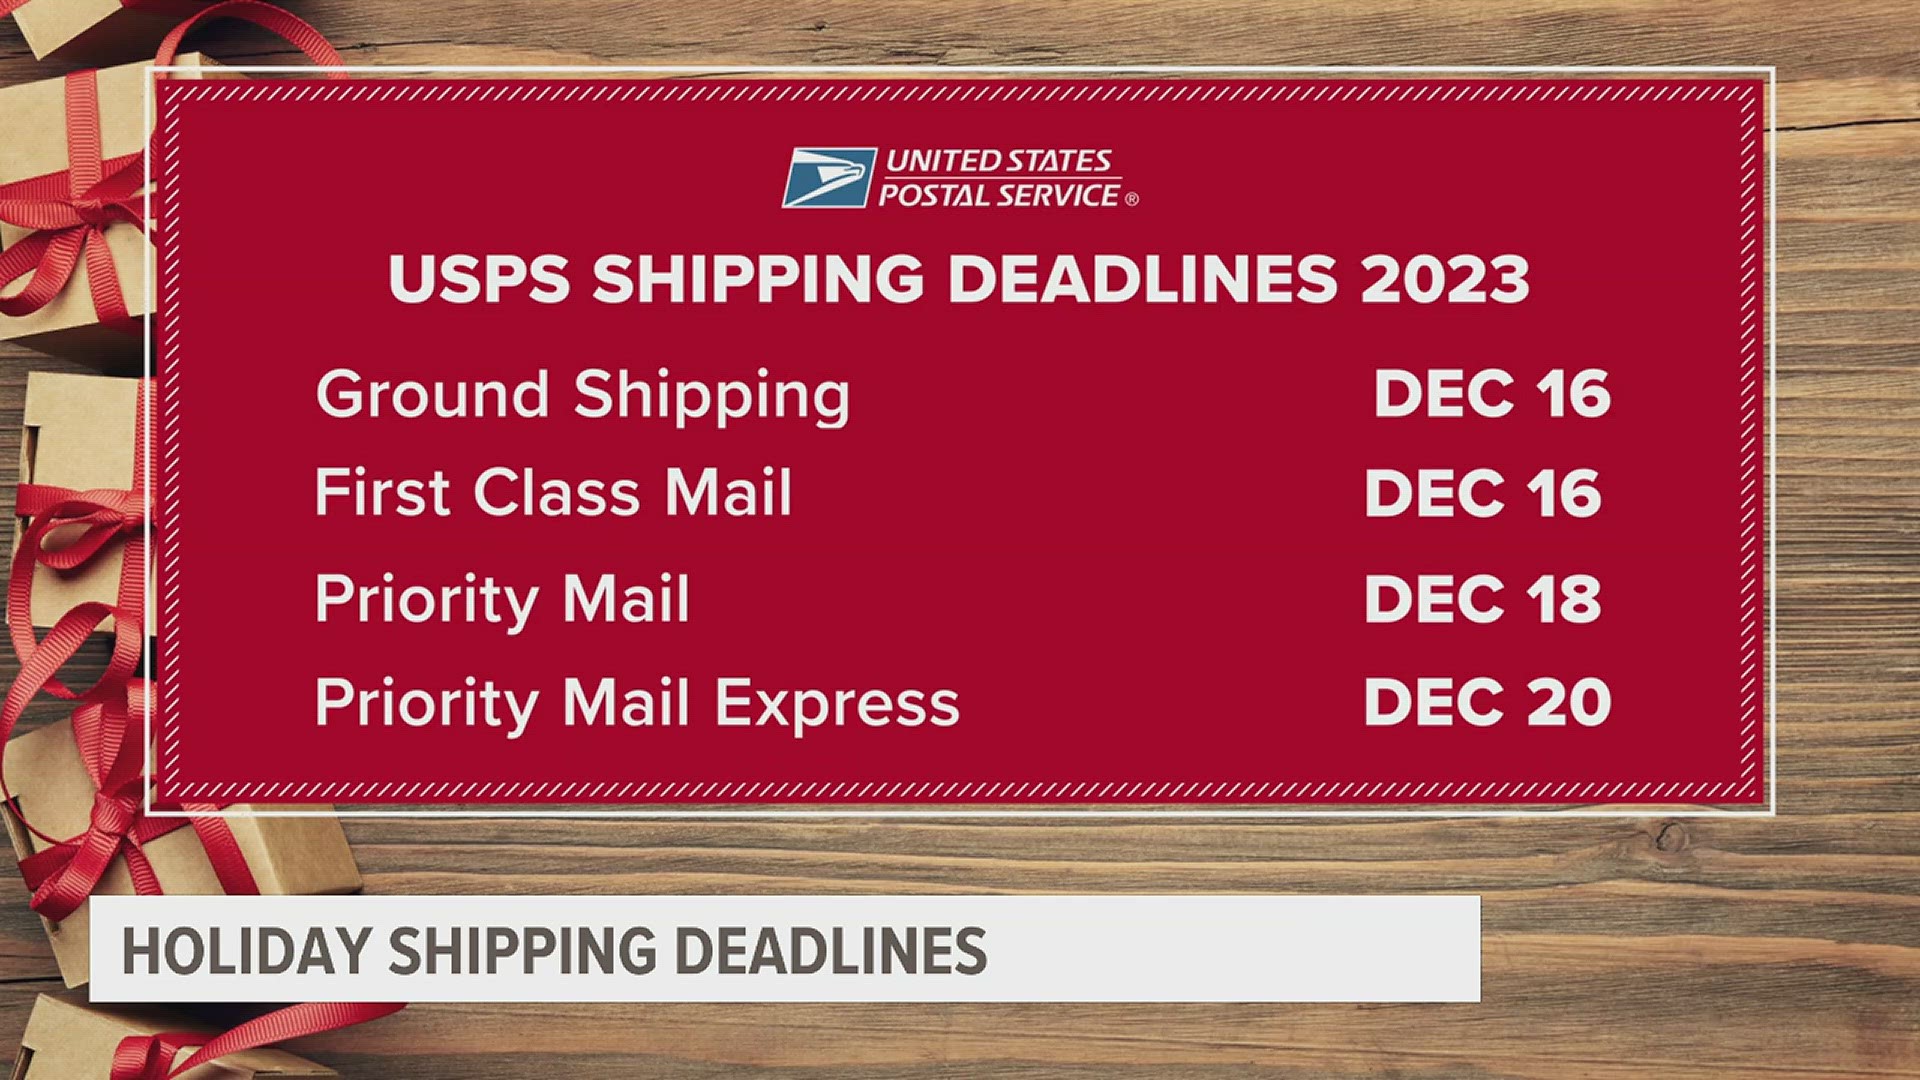 Regional postal shipping deadlines coming up this month, find out how